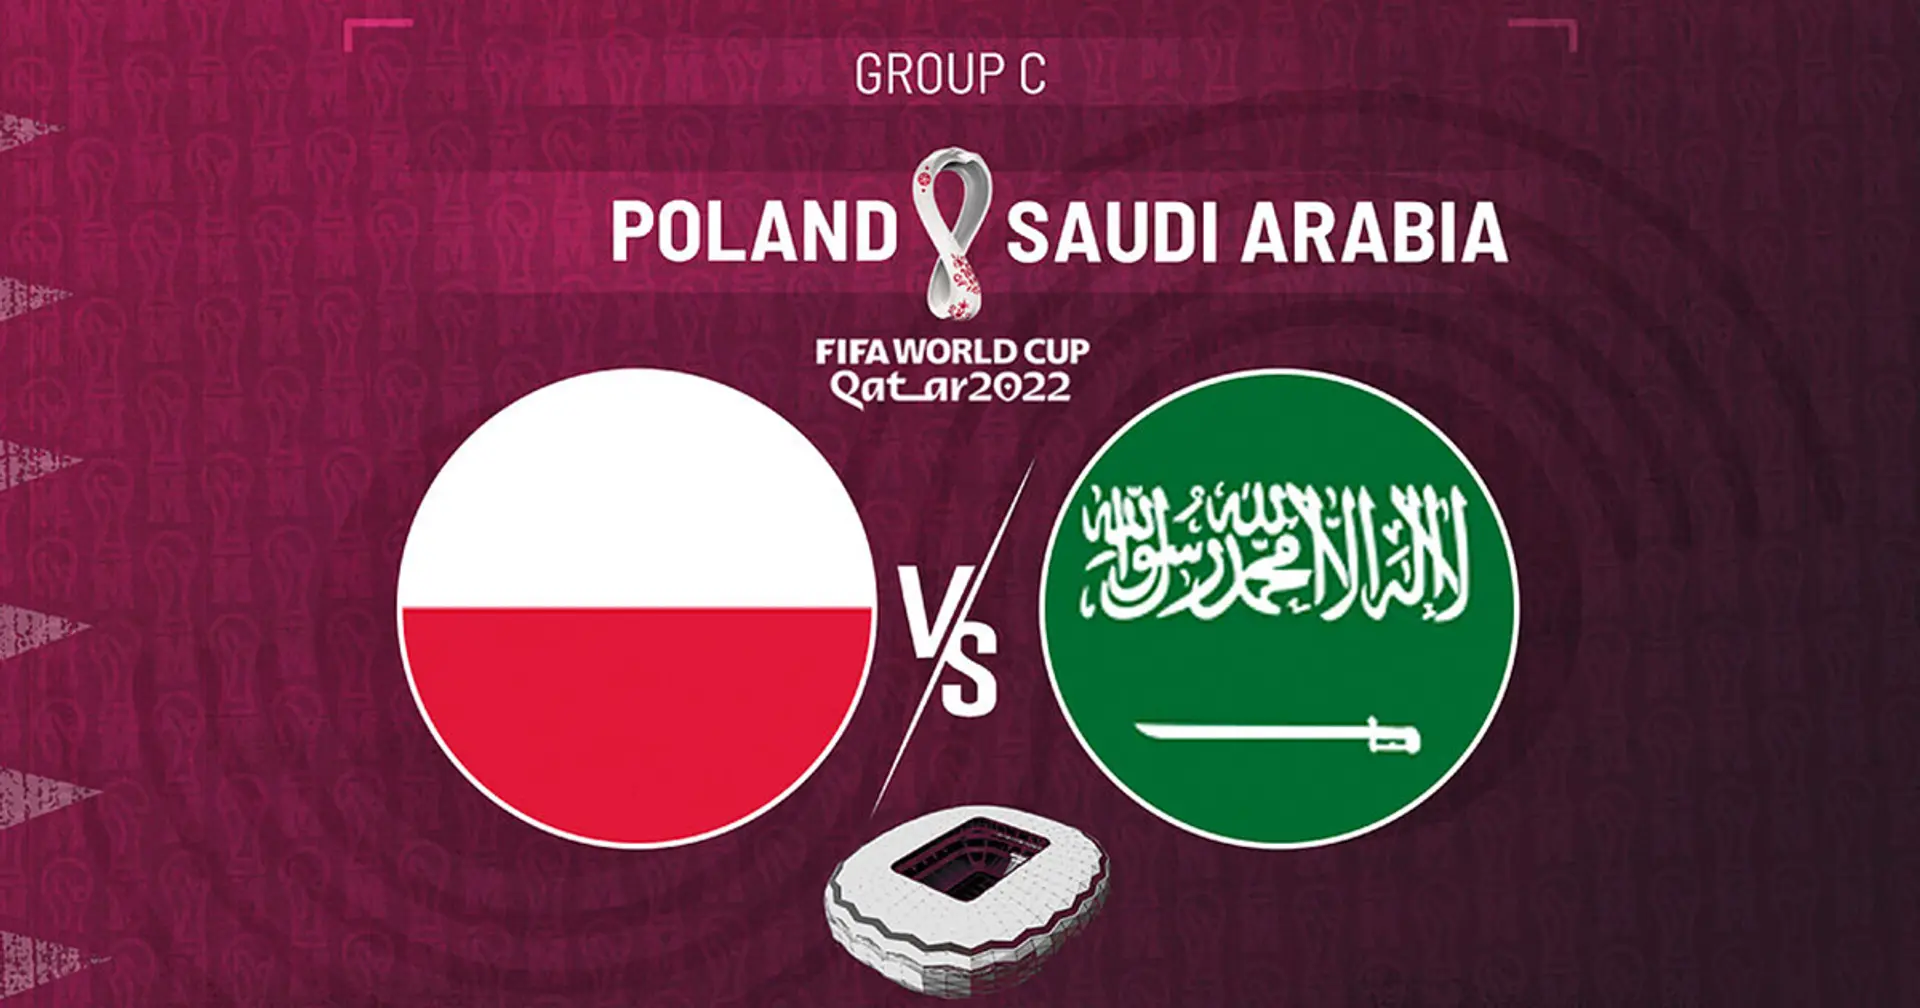 Poland v Saudi Arabia: Official team lineups for the World Cup clash revealed